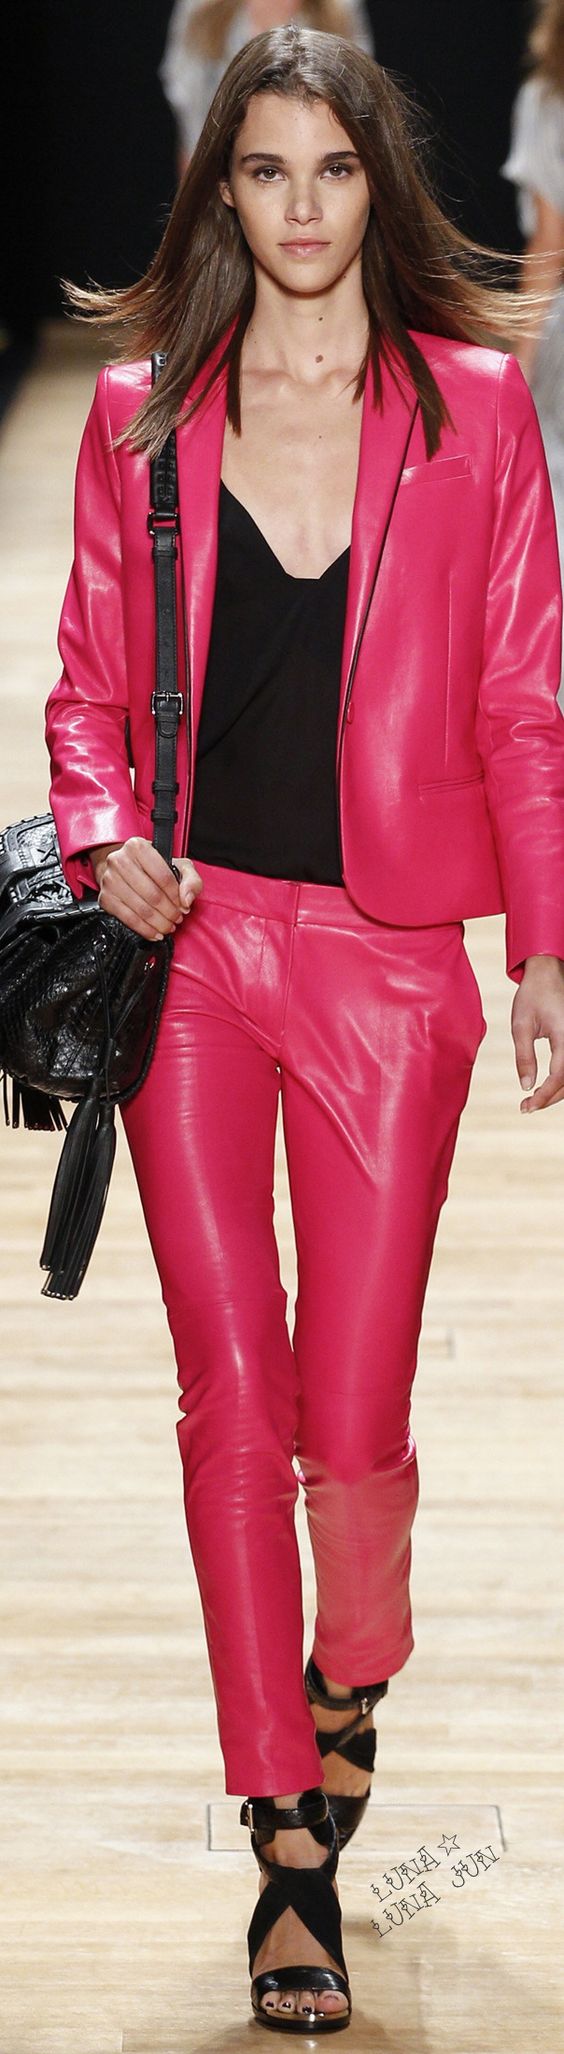 Pink vegan leather jacket and pants